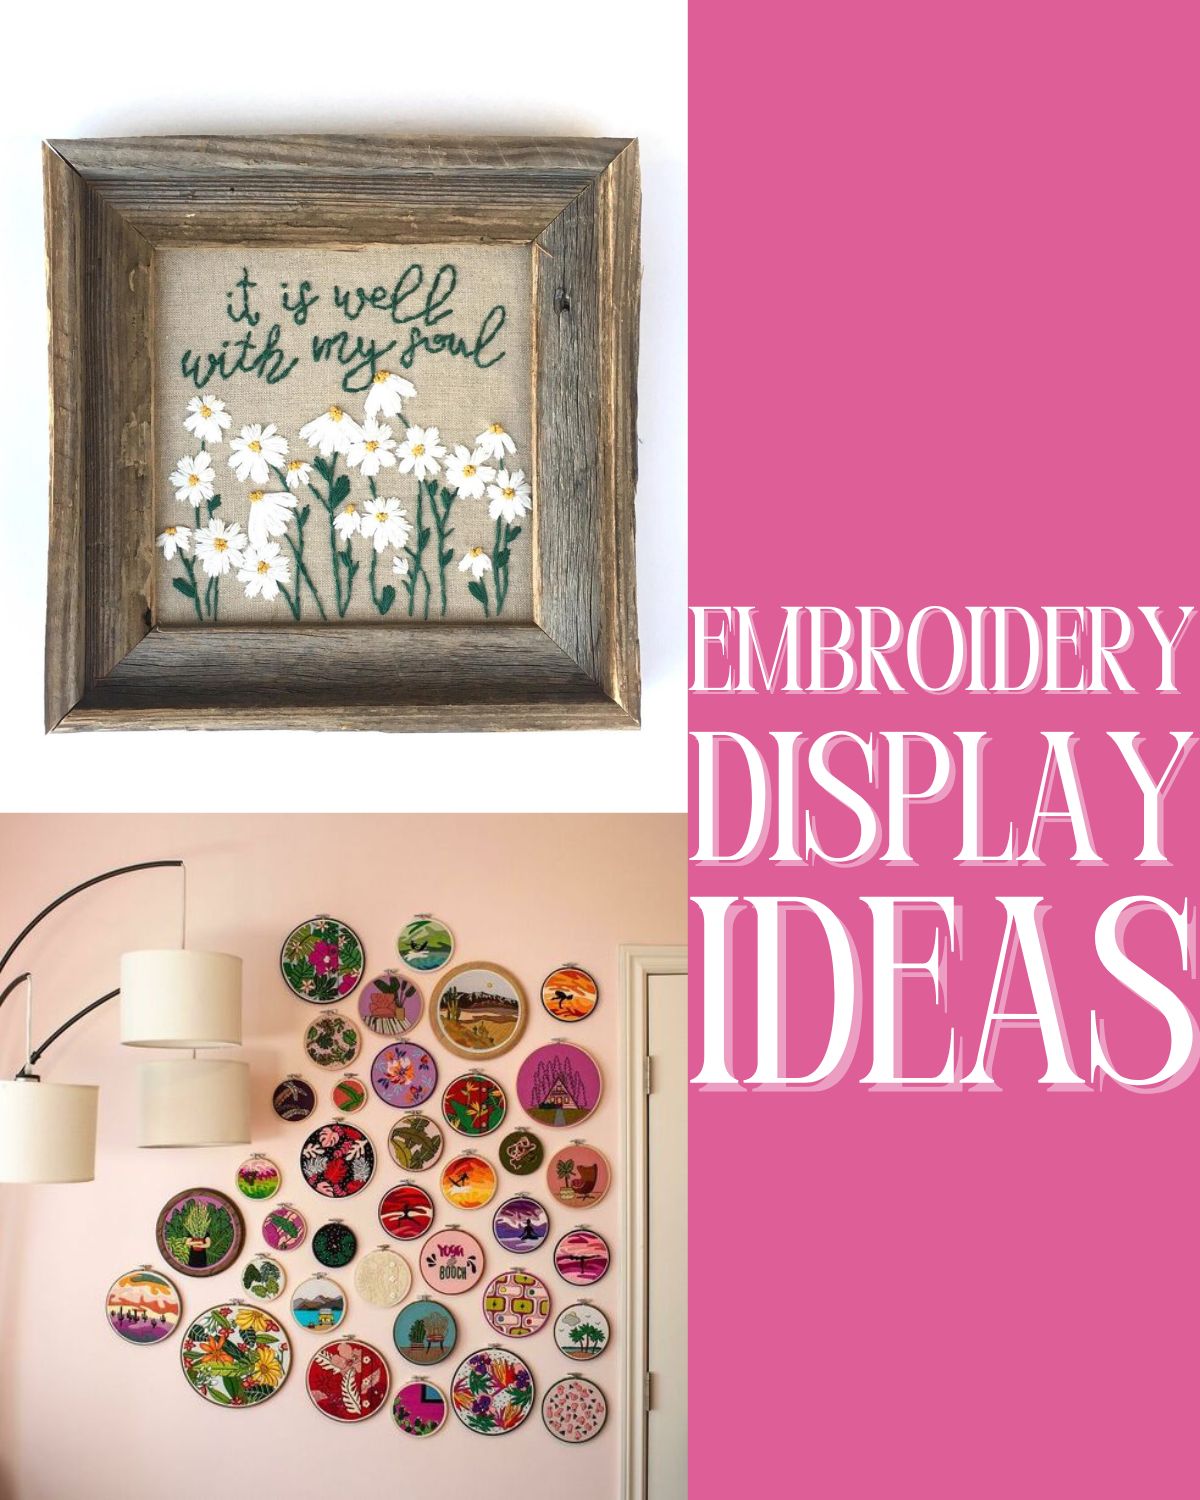 Two different ways to display embroidery